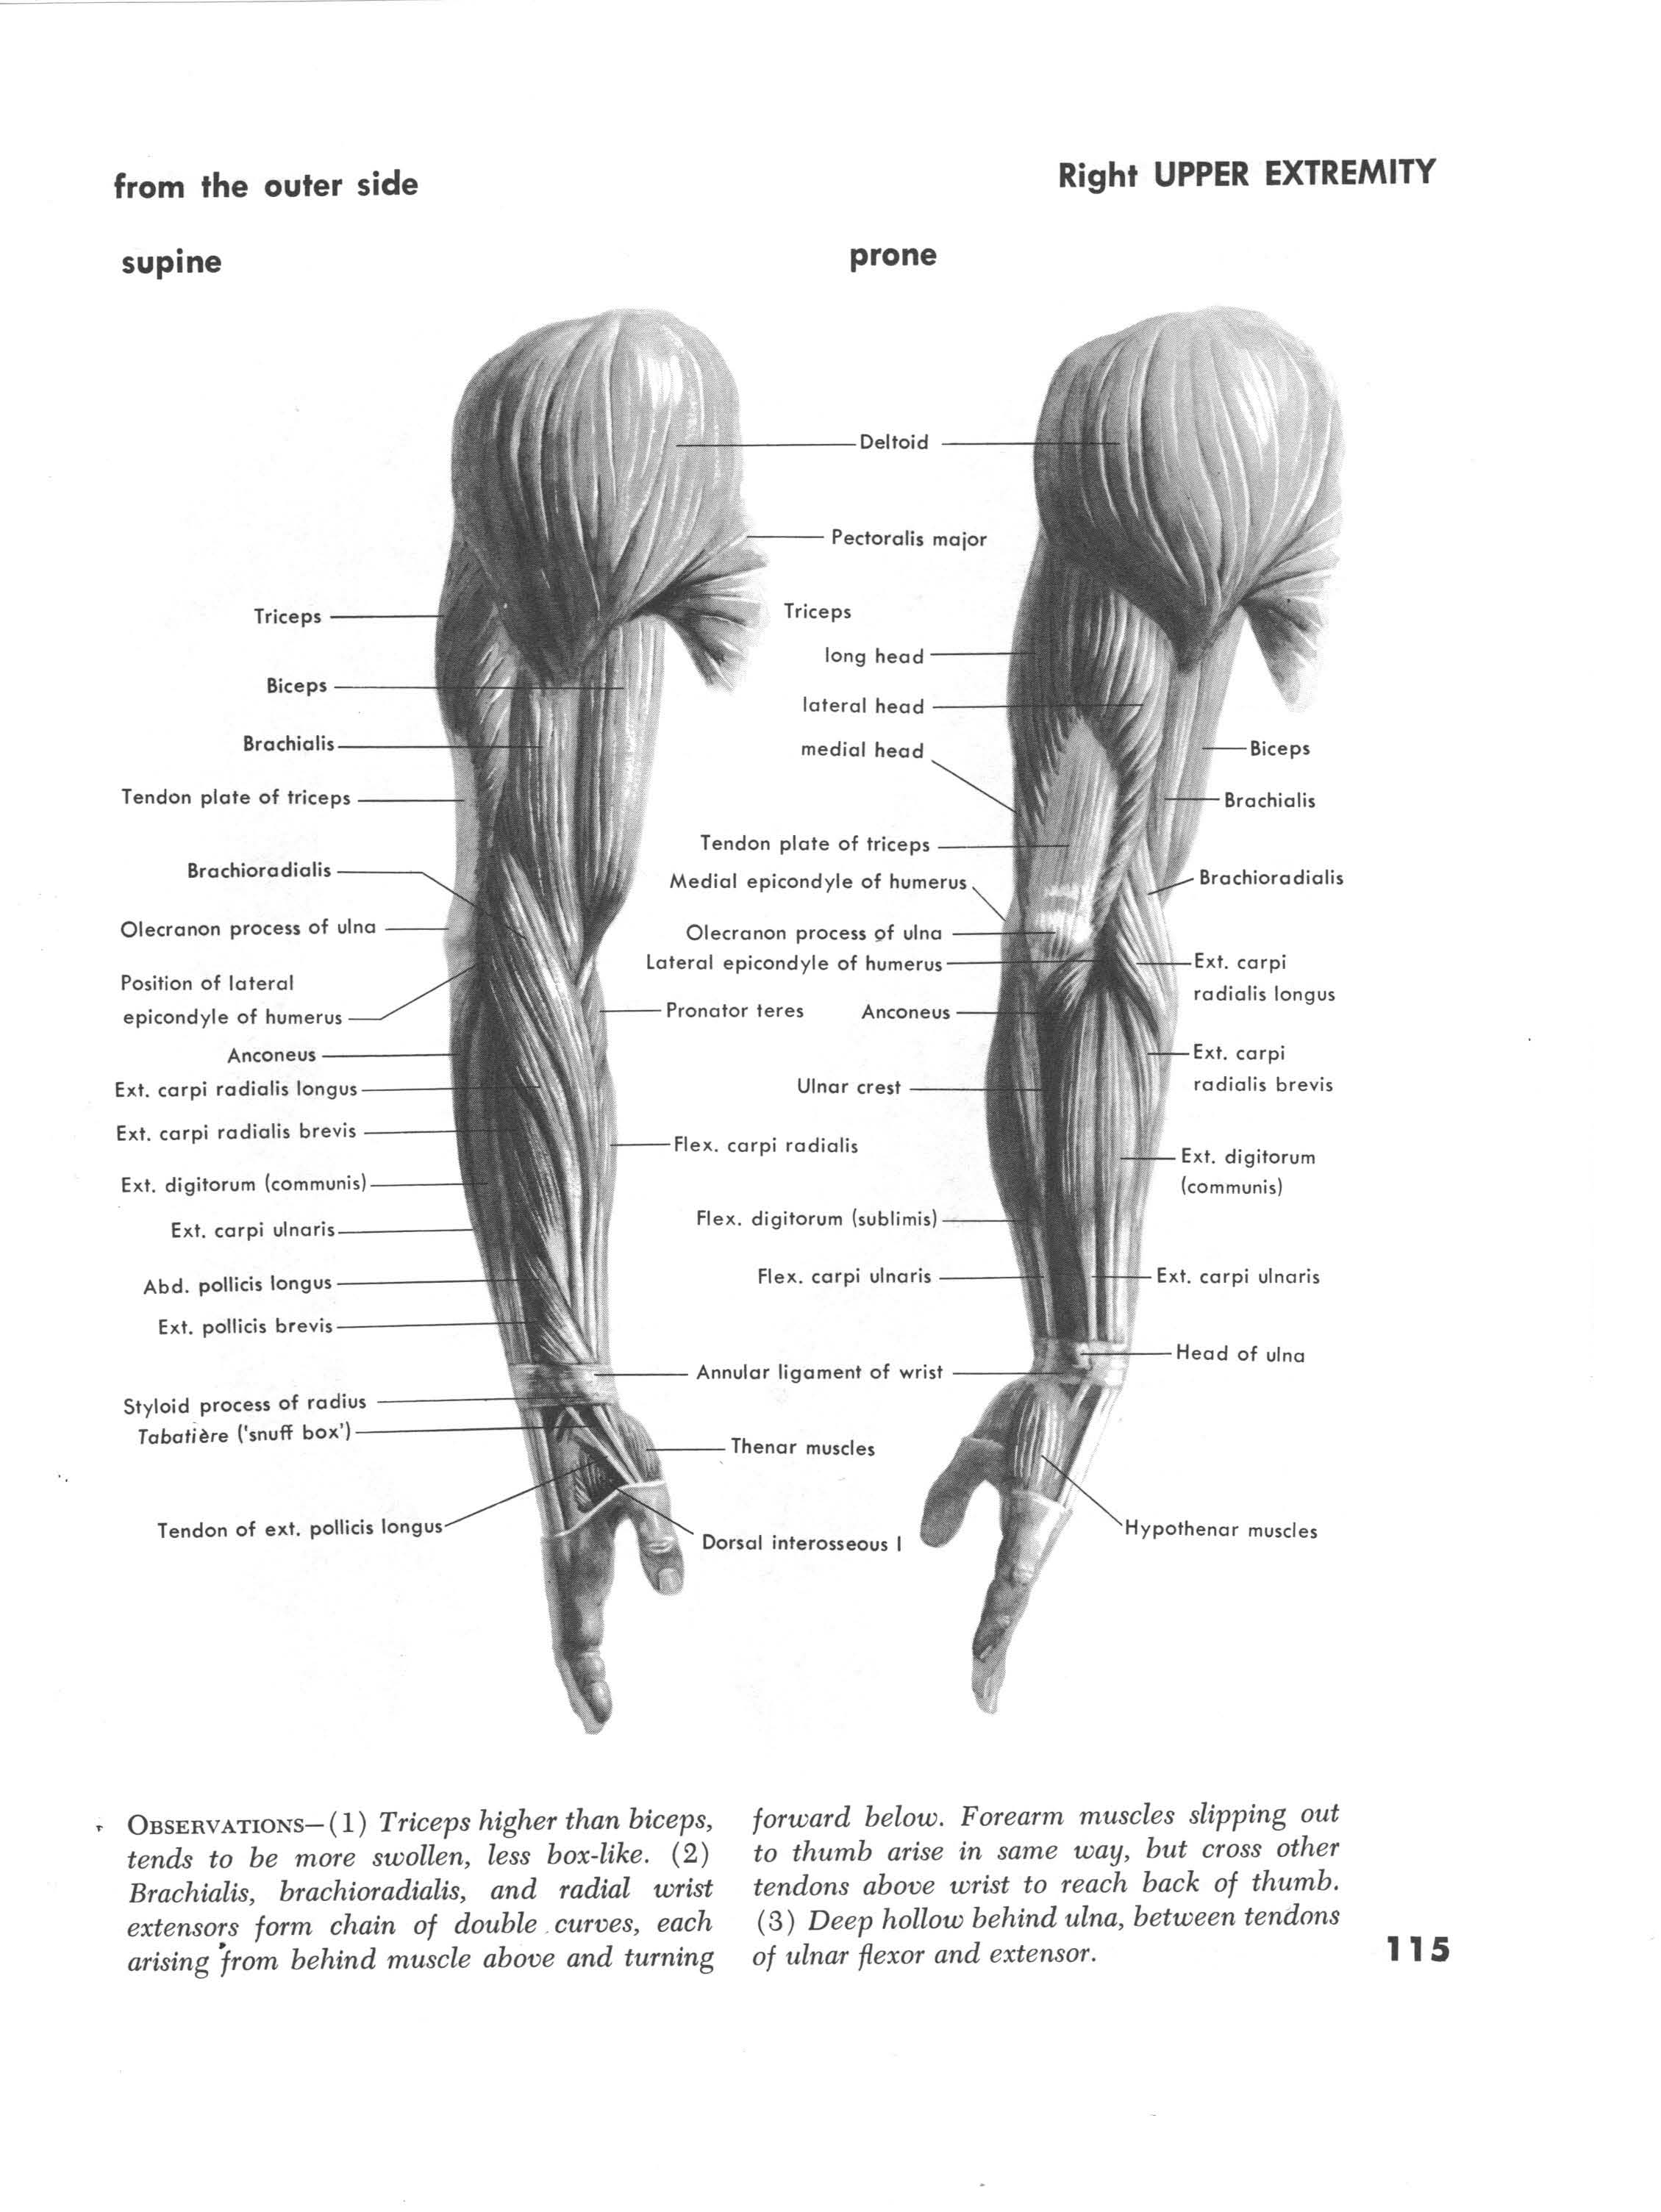 Muscles of the right upper extremity upper view